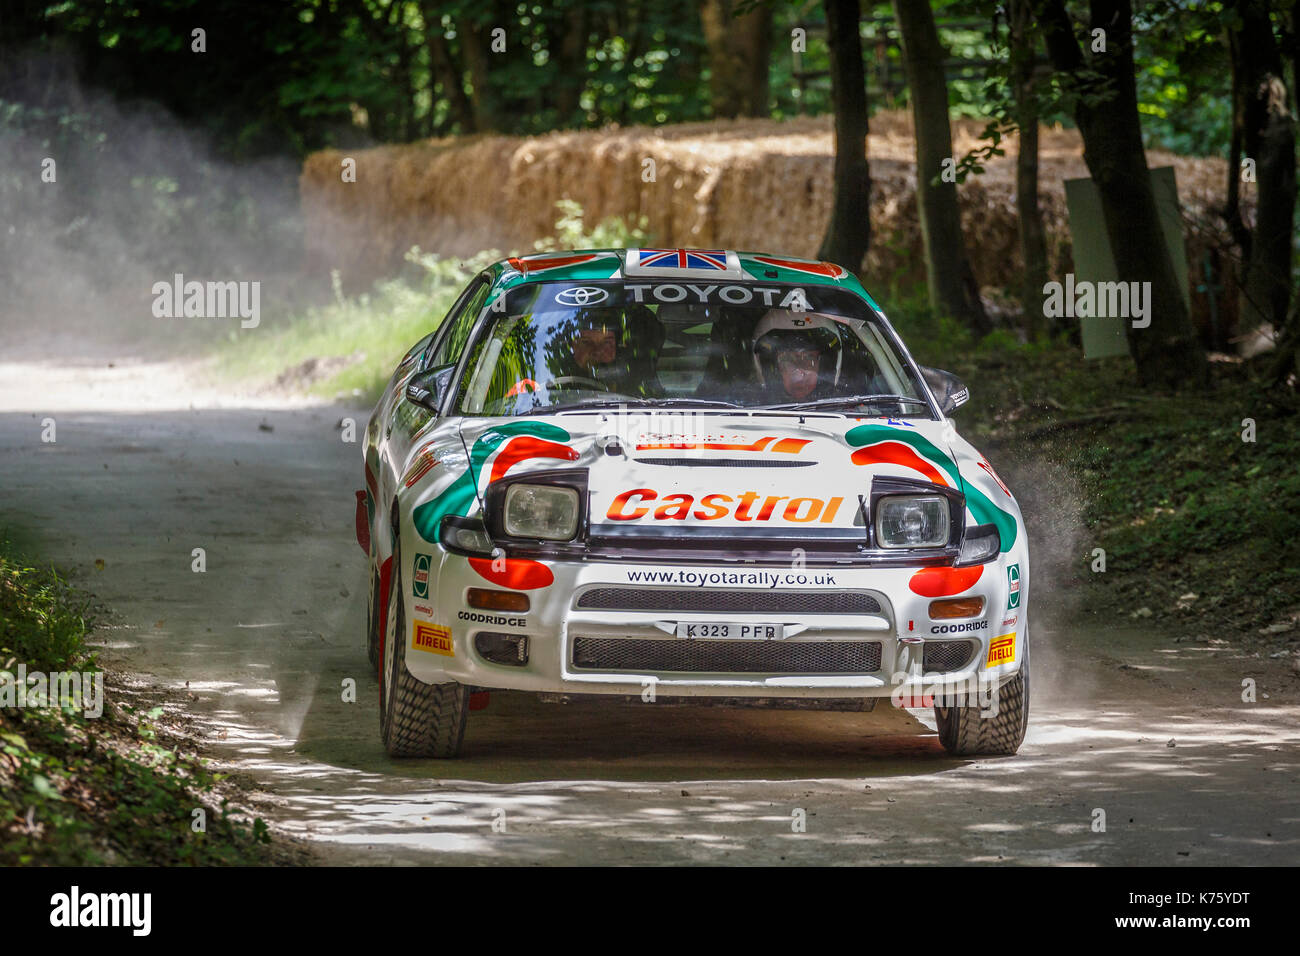 1992 Toyota Celica GT-Four ST185 WRC rally car with driver Gary Le Coadou on the forest stage at the 2017 Goodwood Festival of Speed, Sussex, UK. Stock Photo